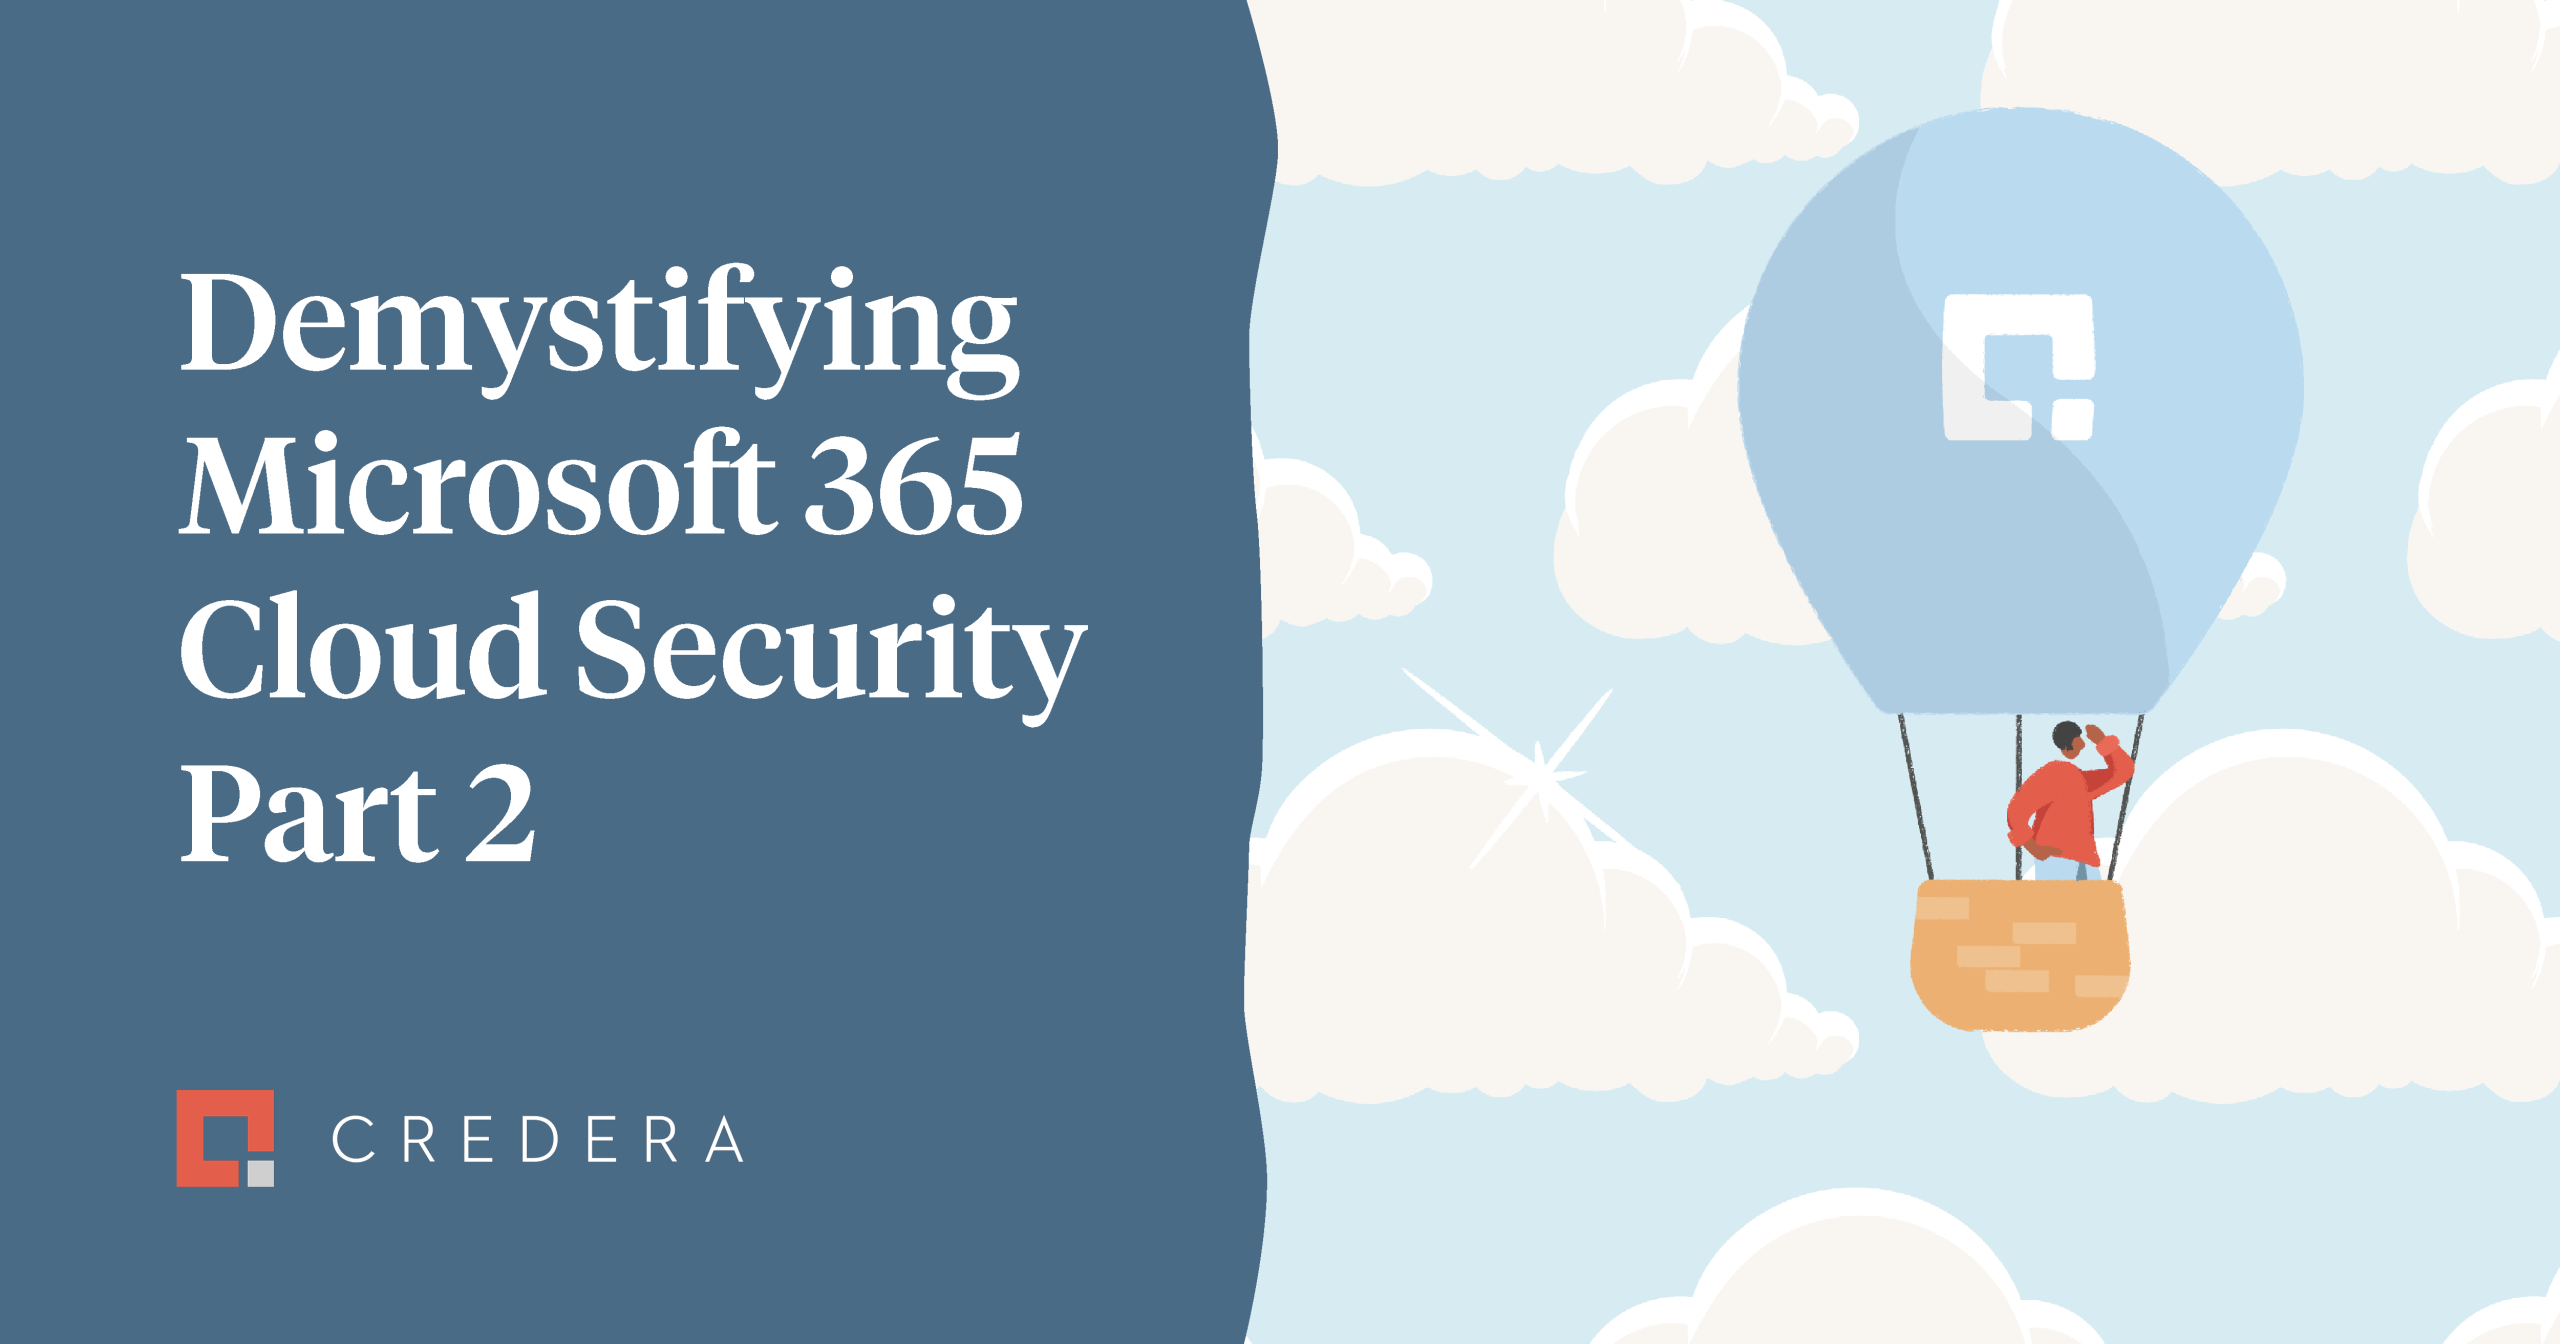 Demystifying Microsoft 365 Cloud Security Part 2: Threat Protection With Microsoft Defender